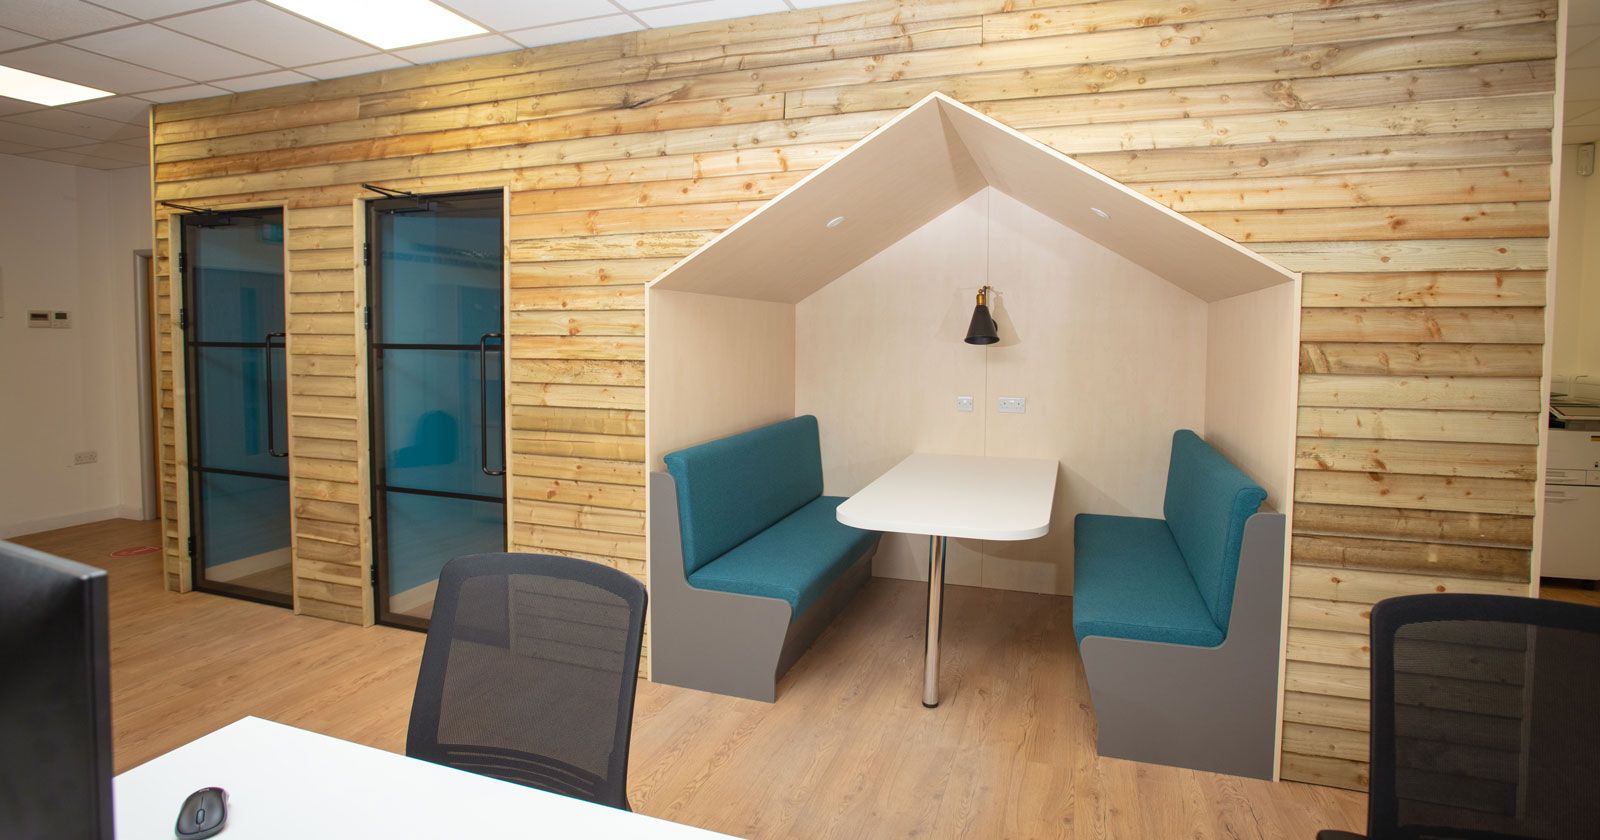 Wattbike Bespoke meeting Pod and Personal Meeting Rooms Designed and Installed by APSS